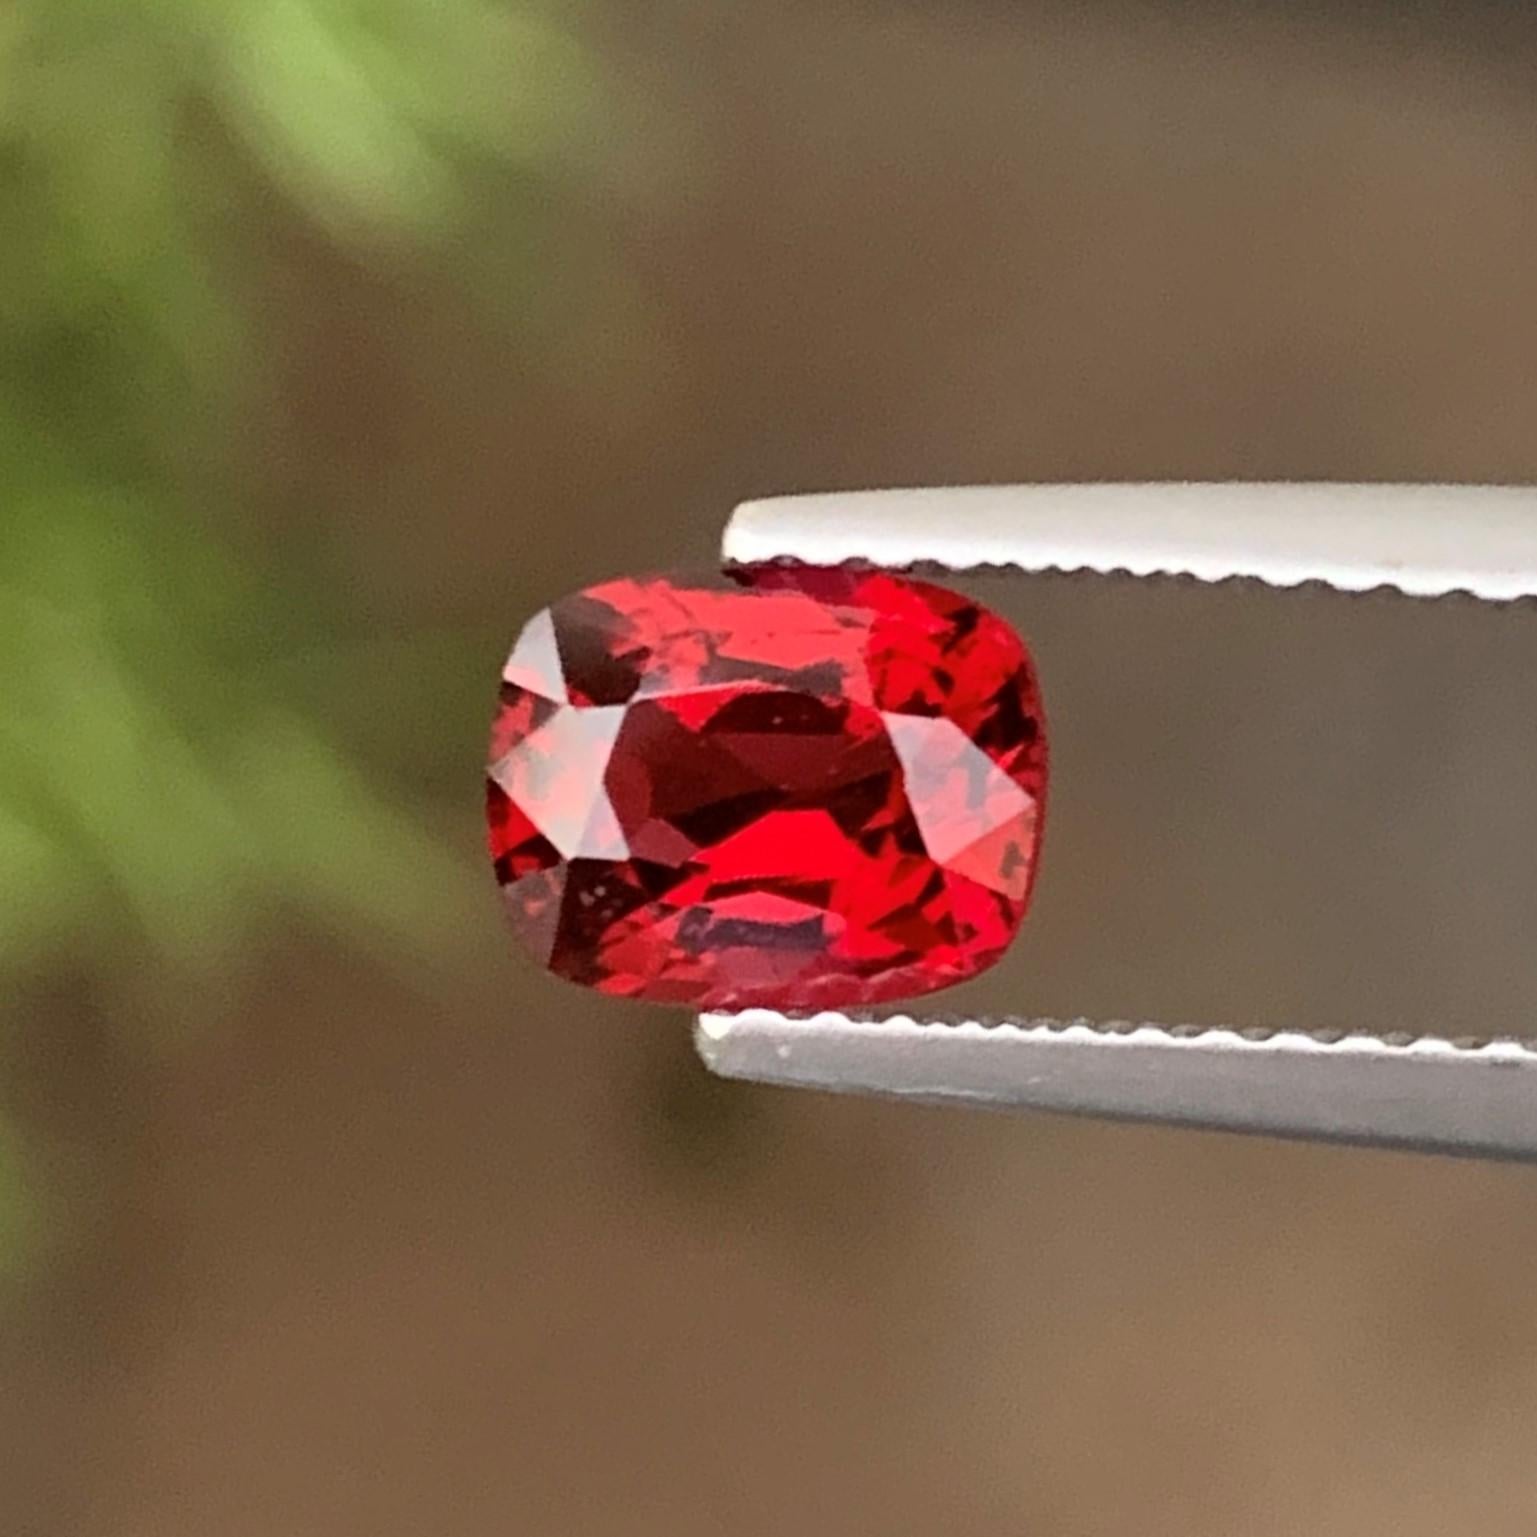 Cushion Cut Exceptional 1.15 Carat Natural Loose Red Spinel From Burma Myanmar For Sale